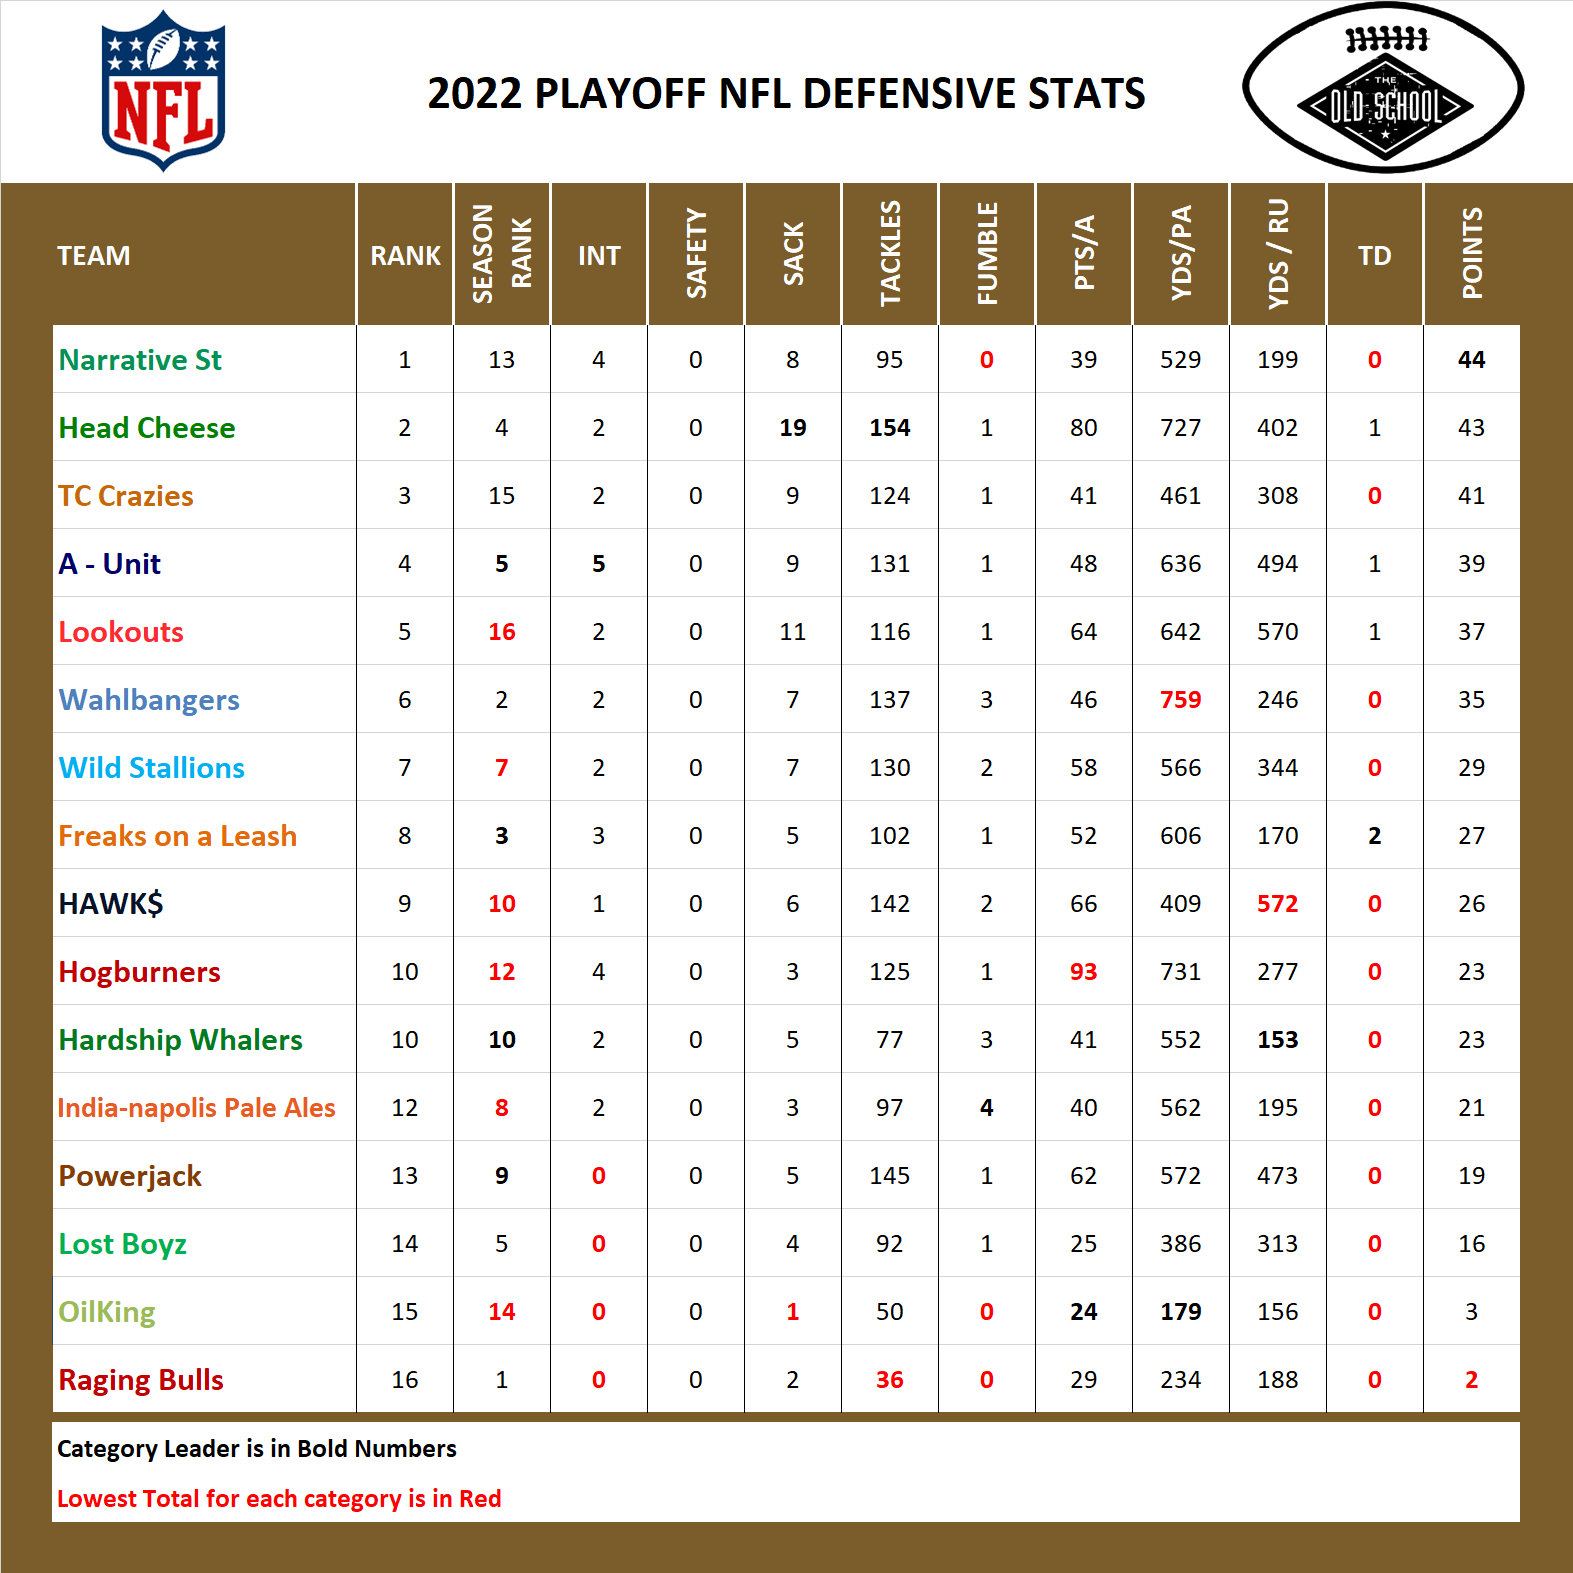 2022 National Football League Pool Playoff Defensive Stats